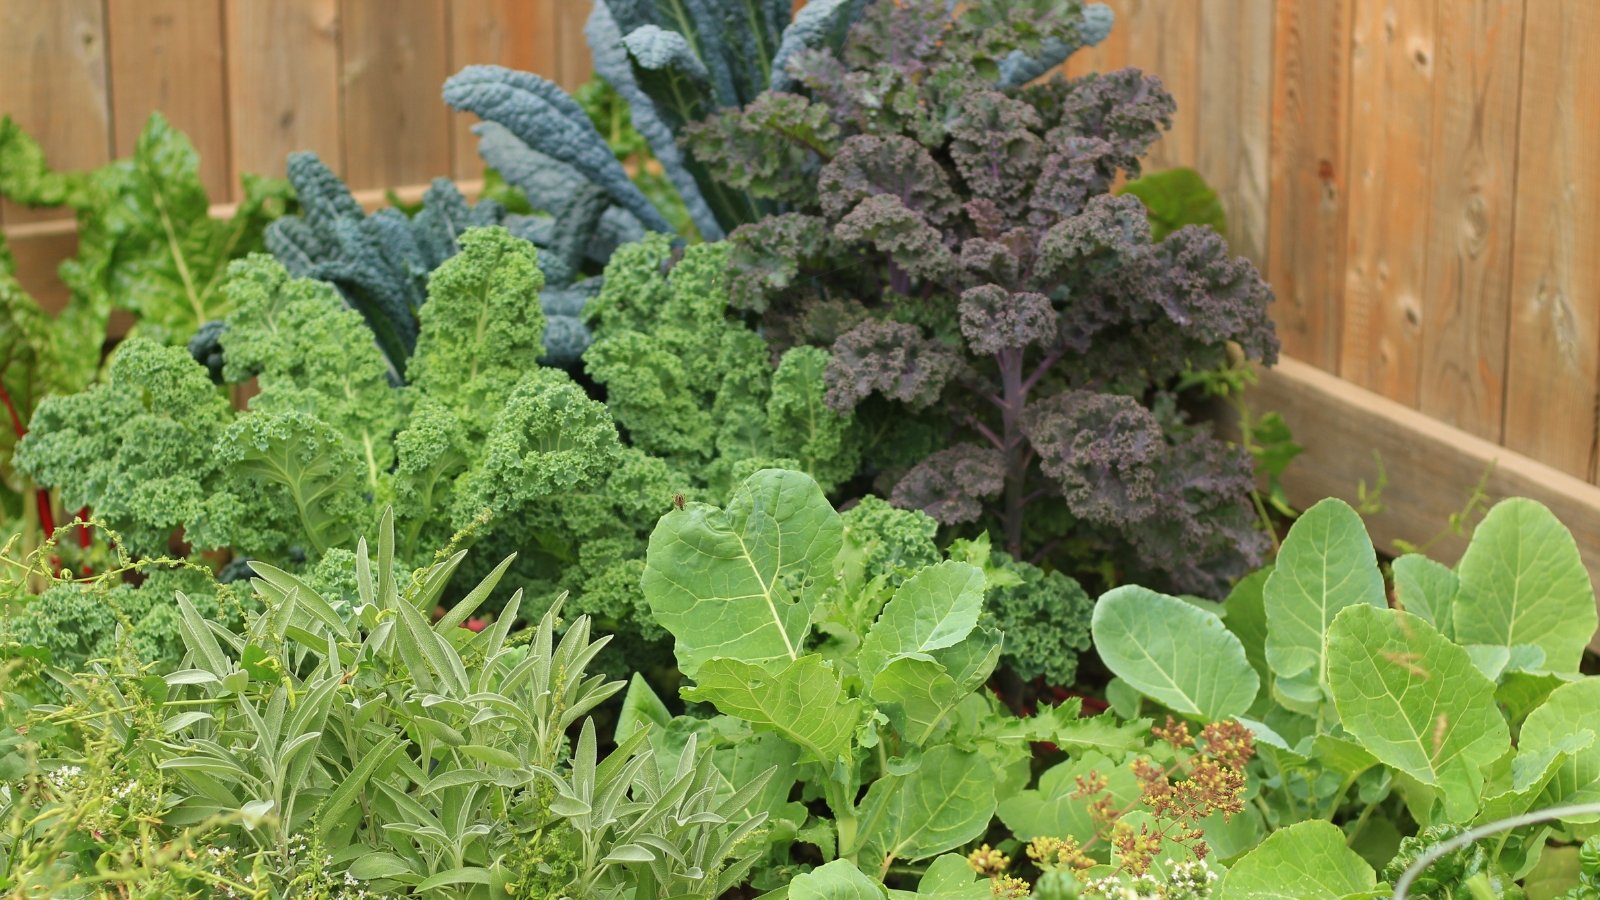 An assortment of leafy greens and purples, showcasing the intricate textures and rich colors of various vegetables in close-up detail, creating a visually captivating and nutritious display.